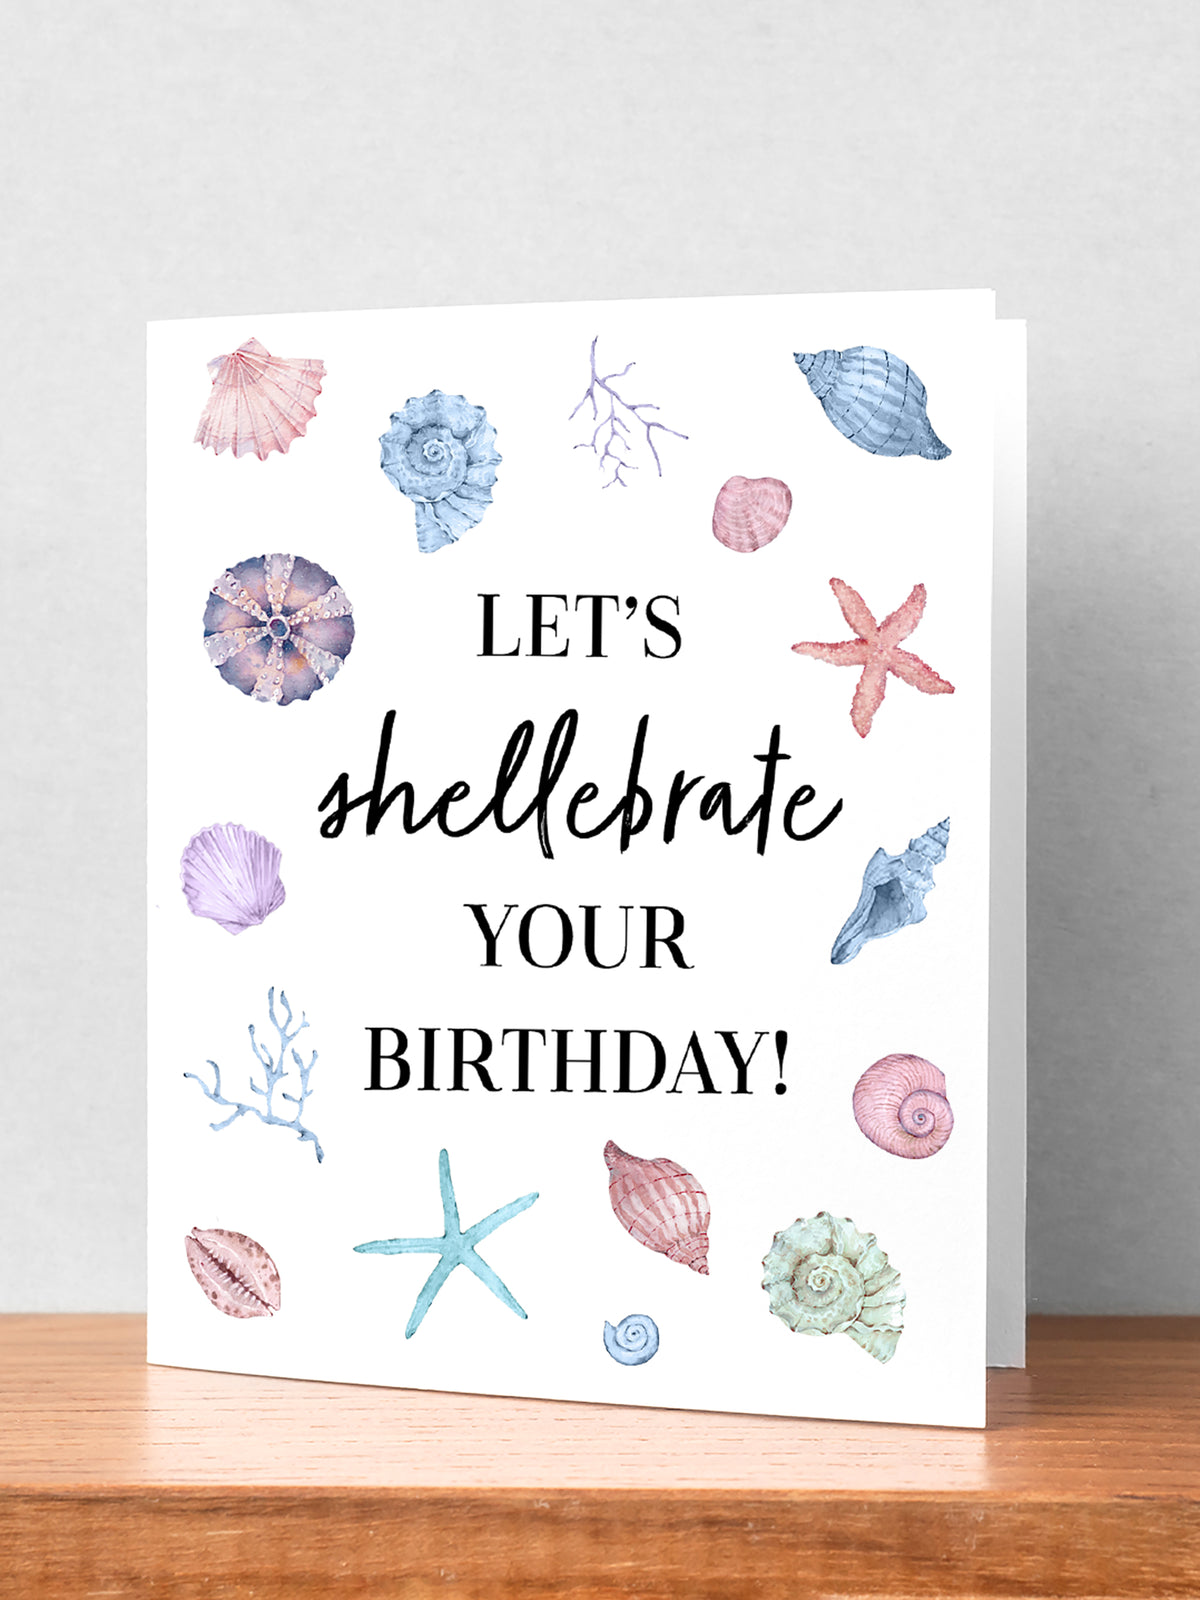 "An artistic depiction of delicate seashells scattered on a sandy beach, accompanied by a vibrant and cheerful birthday card design featuring beach-themed elements, perfect for celebrating a special day by the sea." Light blue pale red, cream colors with Black lettering